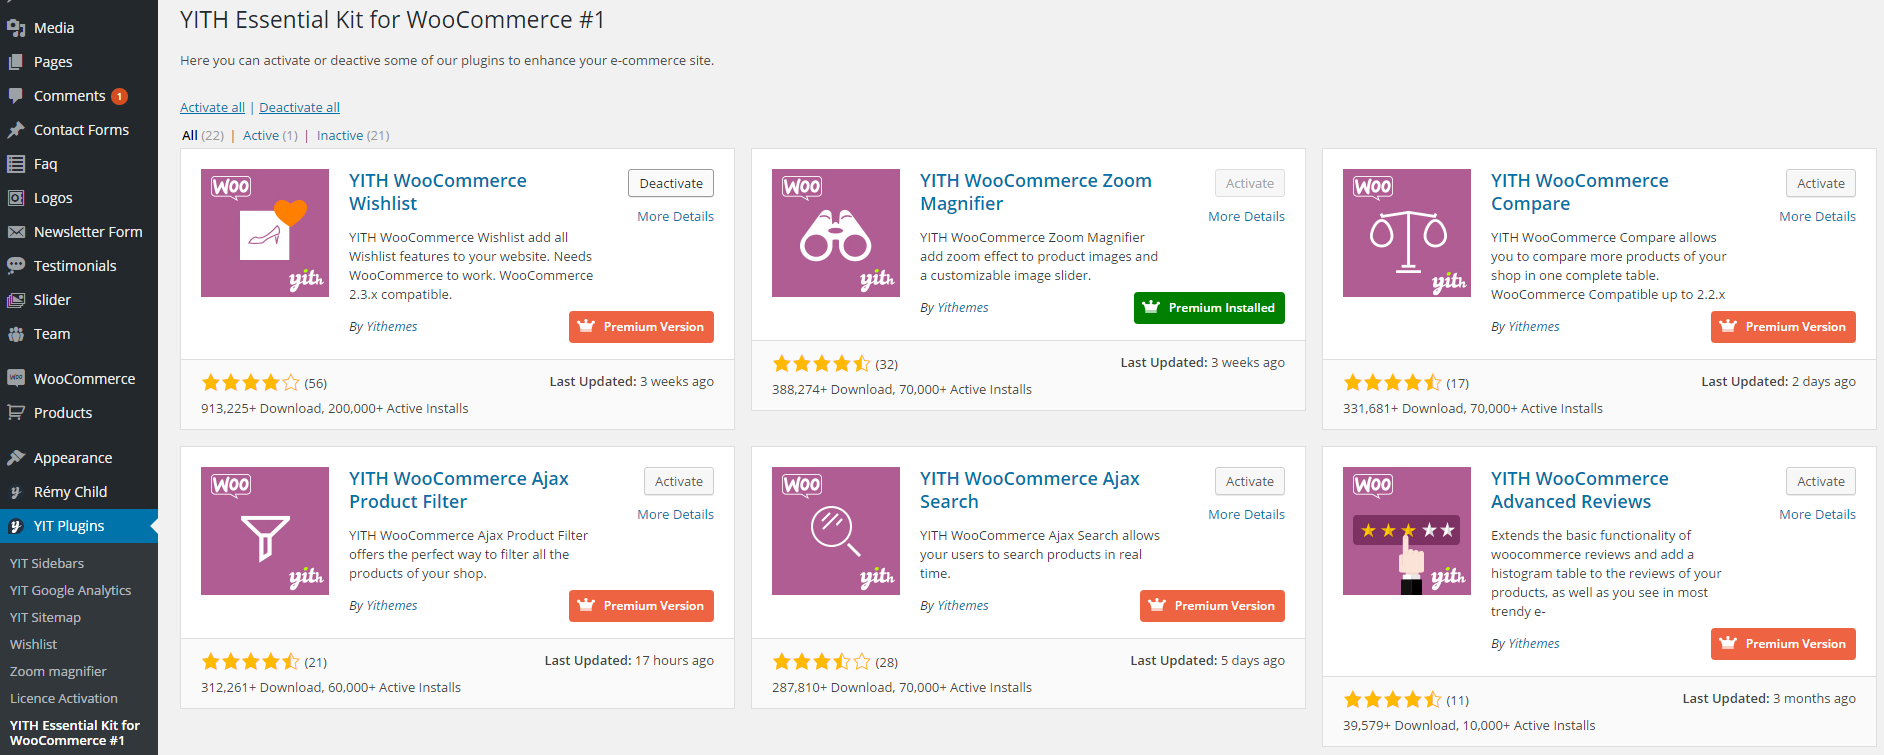 YITH Essential Kit for WooCommerce #1 Download Free Wordpress Plugin 3